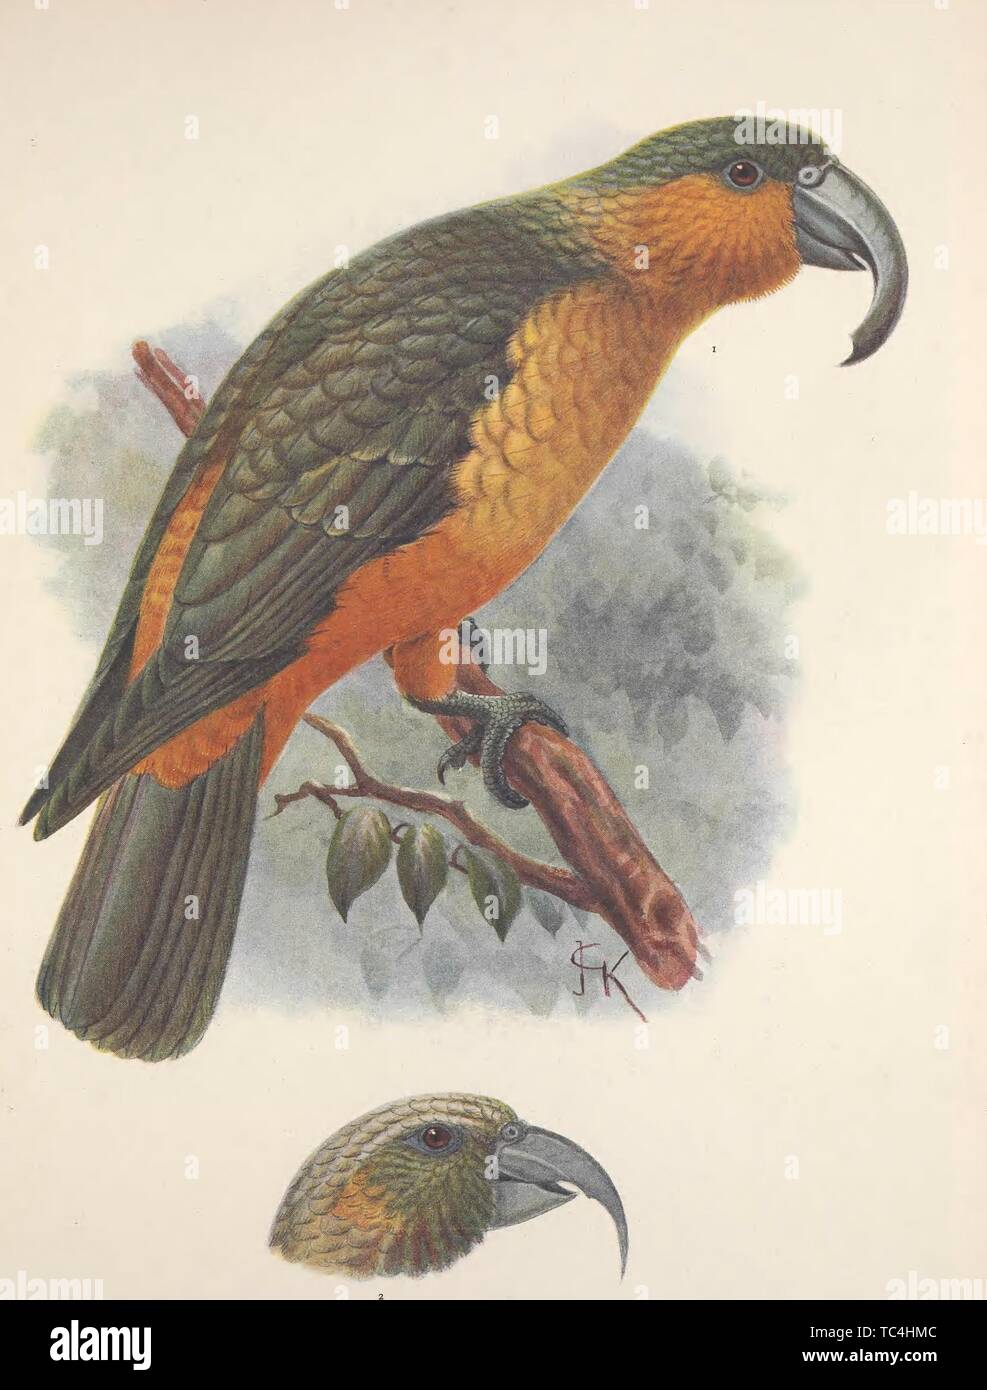 Engravings of the Nestor Norfolcensis and the head of Nestor Productus, from the book 'Extinct Birds' by Lionel Walter Rothschild, 1907. Courtesy Internet Archive. () Stock Photo